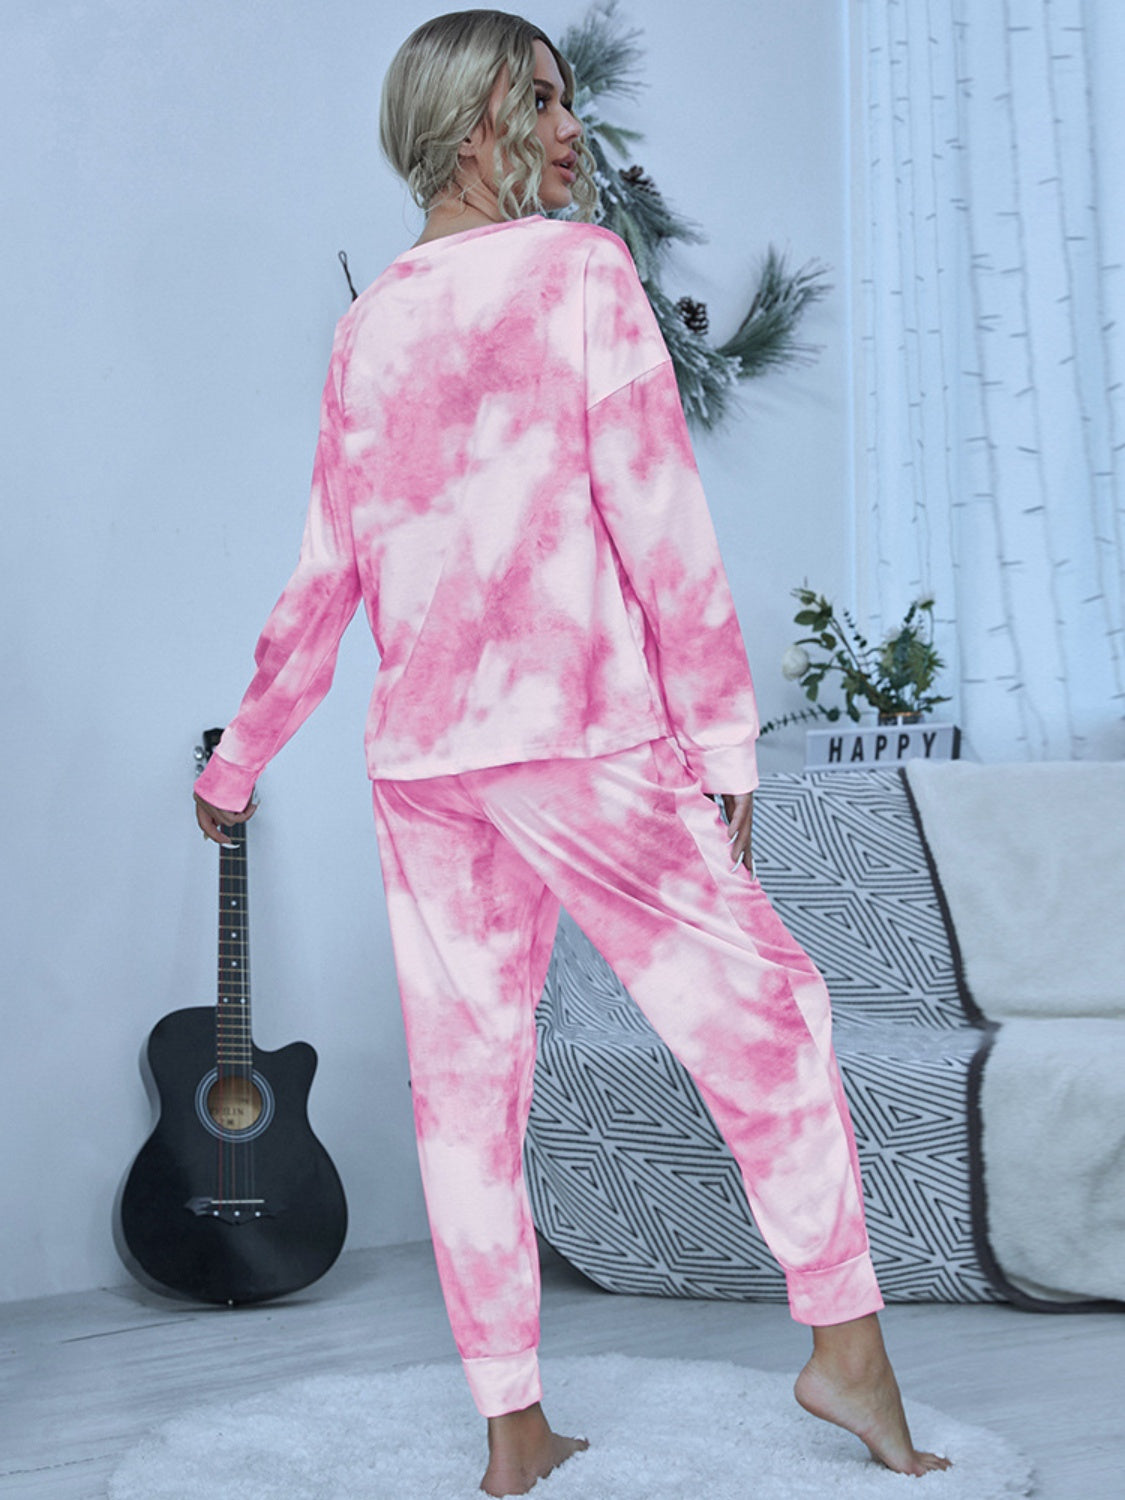 Tie-Dye Round Neck Top and Pants Lounge Set - Tophatter Deals and Online Shopping - Electronics, Jewelry, Beauty, Health, Gadgets, Fashion - Tophatter's Discounts & Offers - tophatters